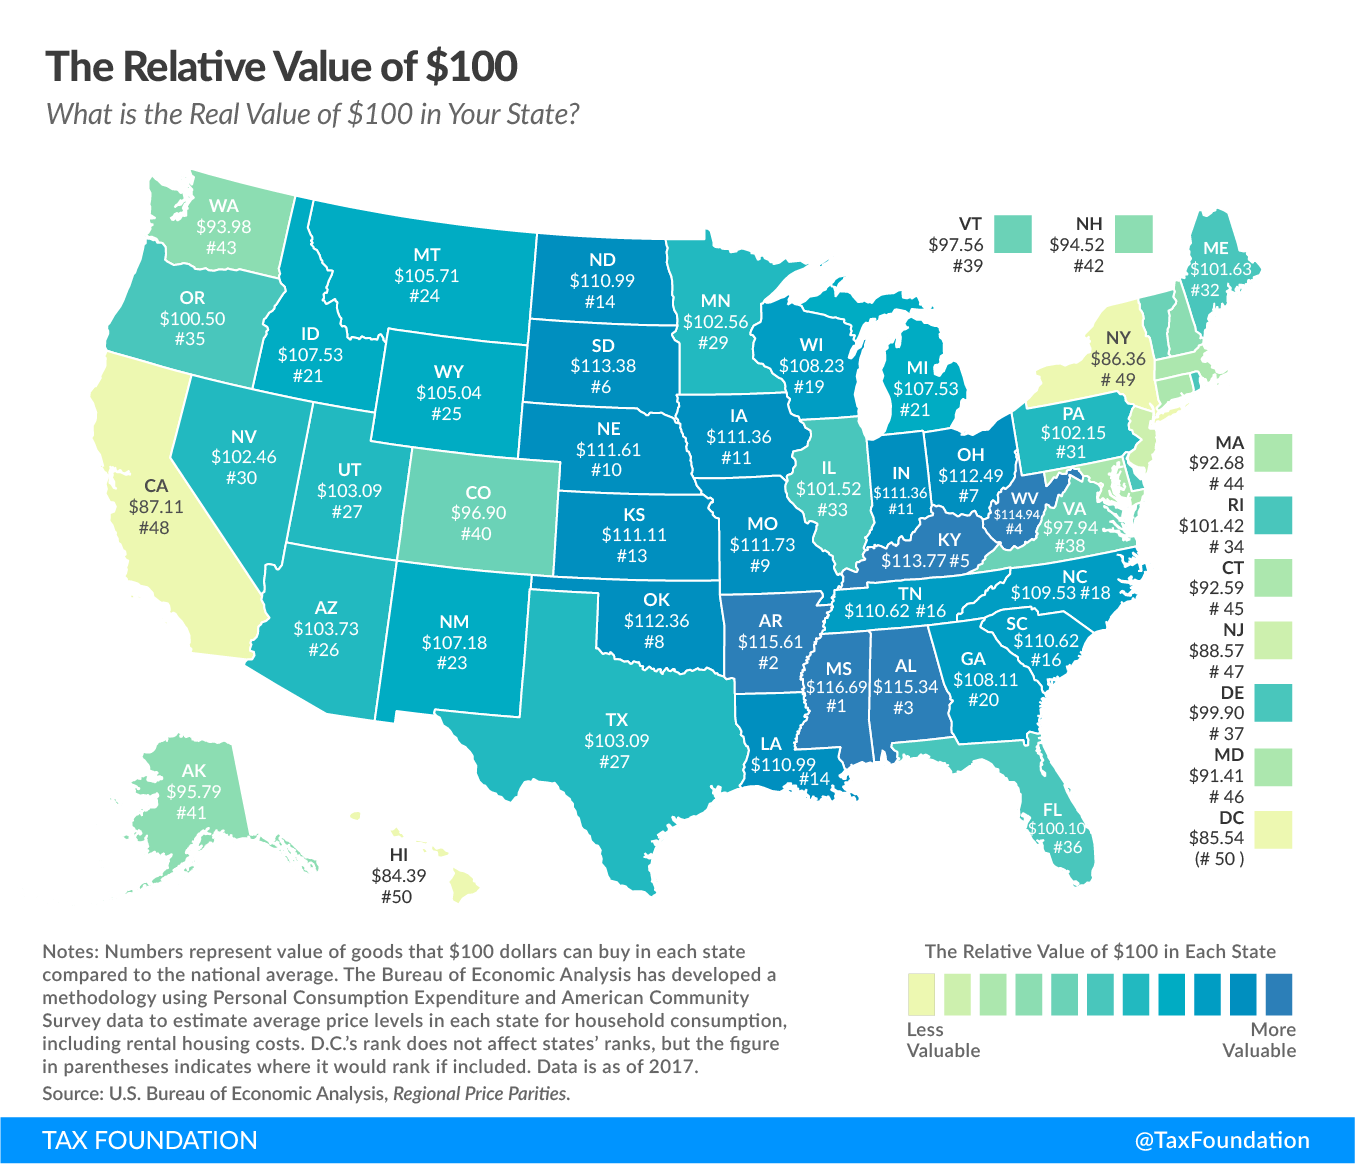 Relative value of $100 in your state 2019 purchasing power 2019 price parity map, biggest bang for your buck states 2019 biggest bang for your buck states, price parity map, purchasing power, real income, nominal income, time value of money, best value states